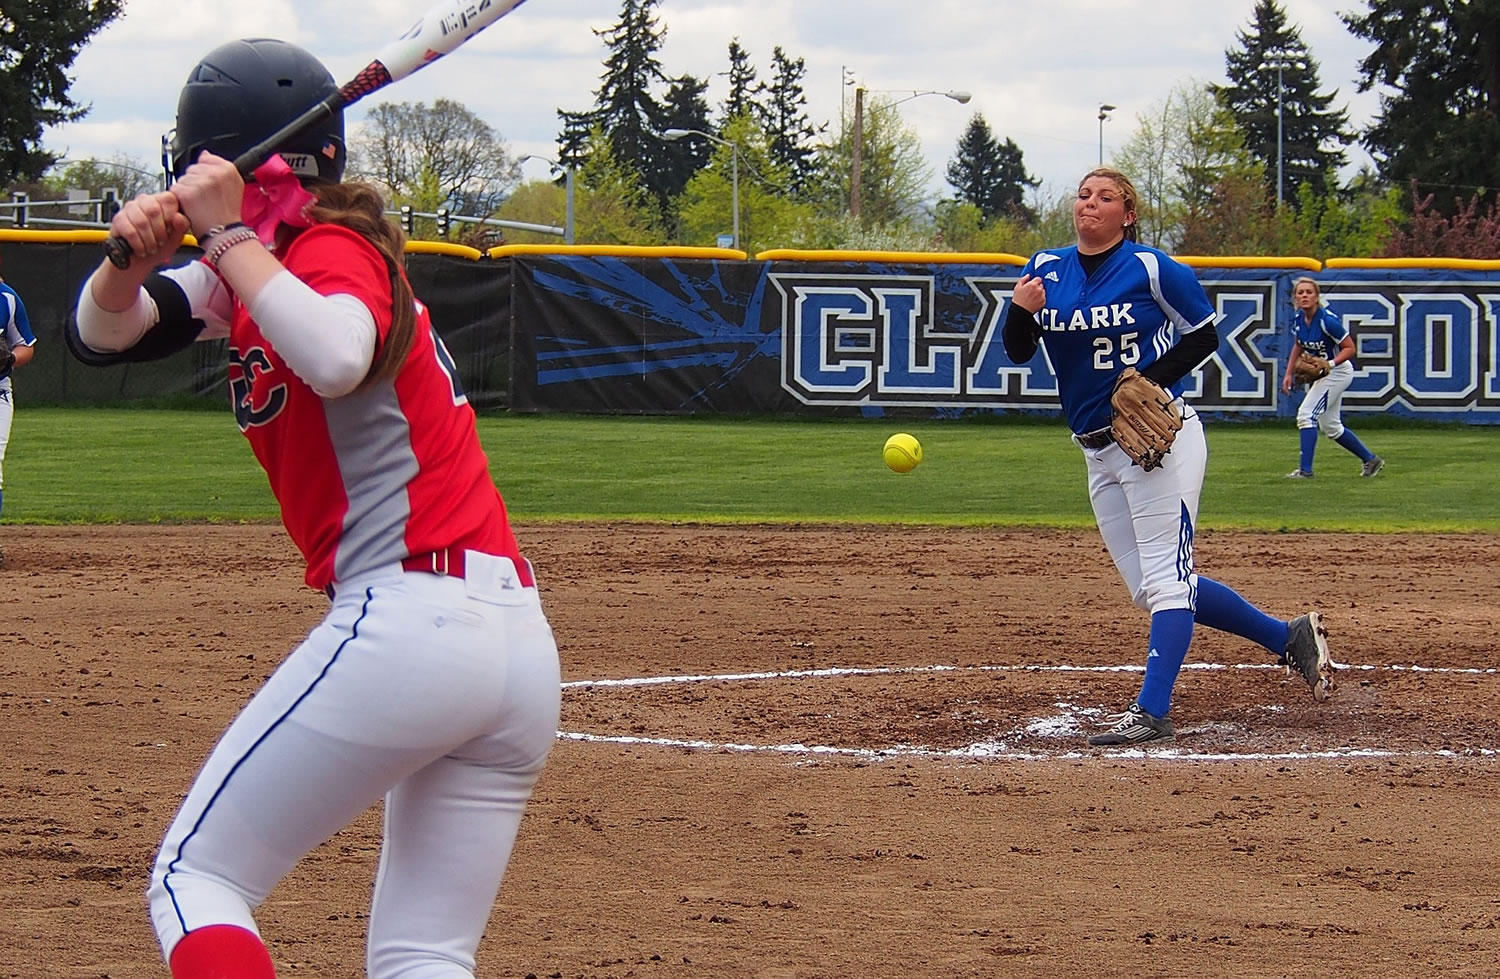 Clark College pitcher Katelyn Lukes delivers to Clackamas batter Cassidy Edwards during the first game of a doubleheader Wednesday, April 8, 2015.